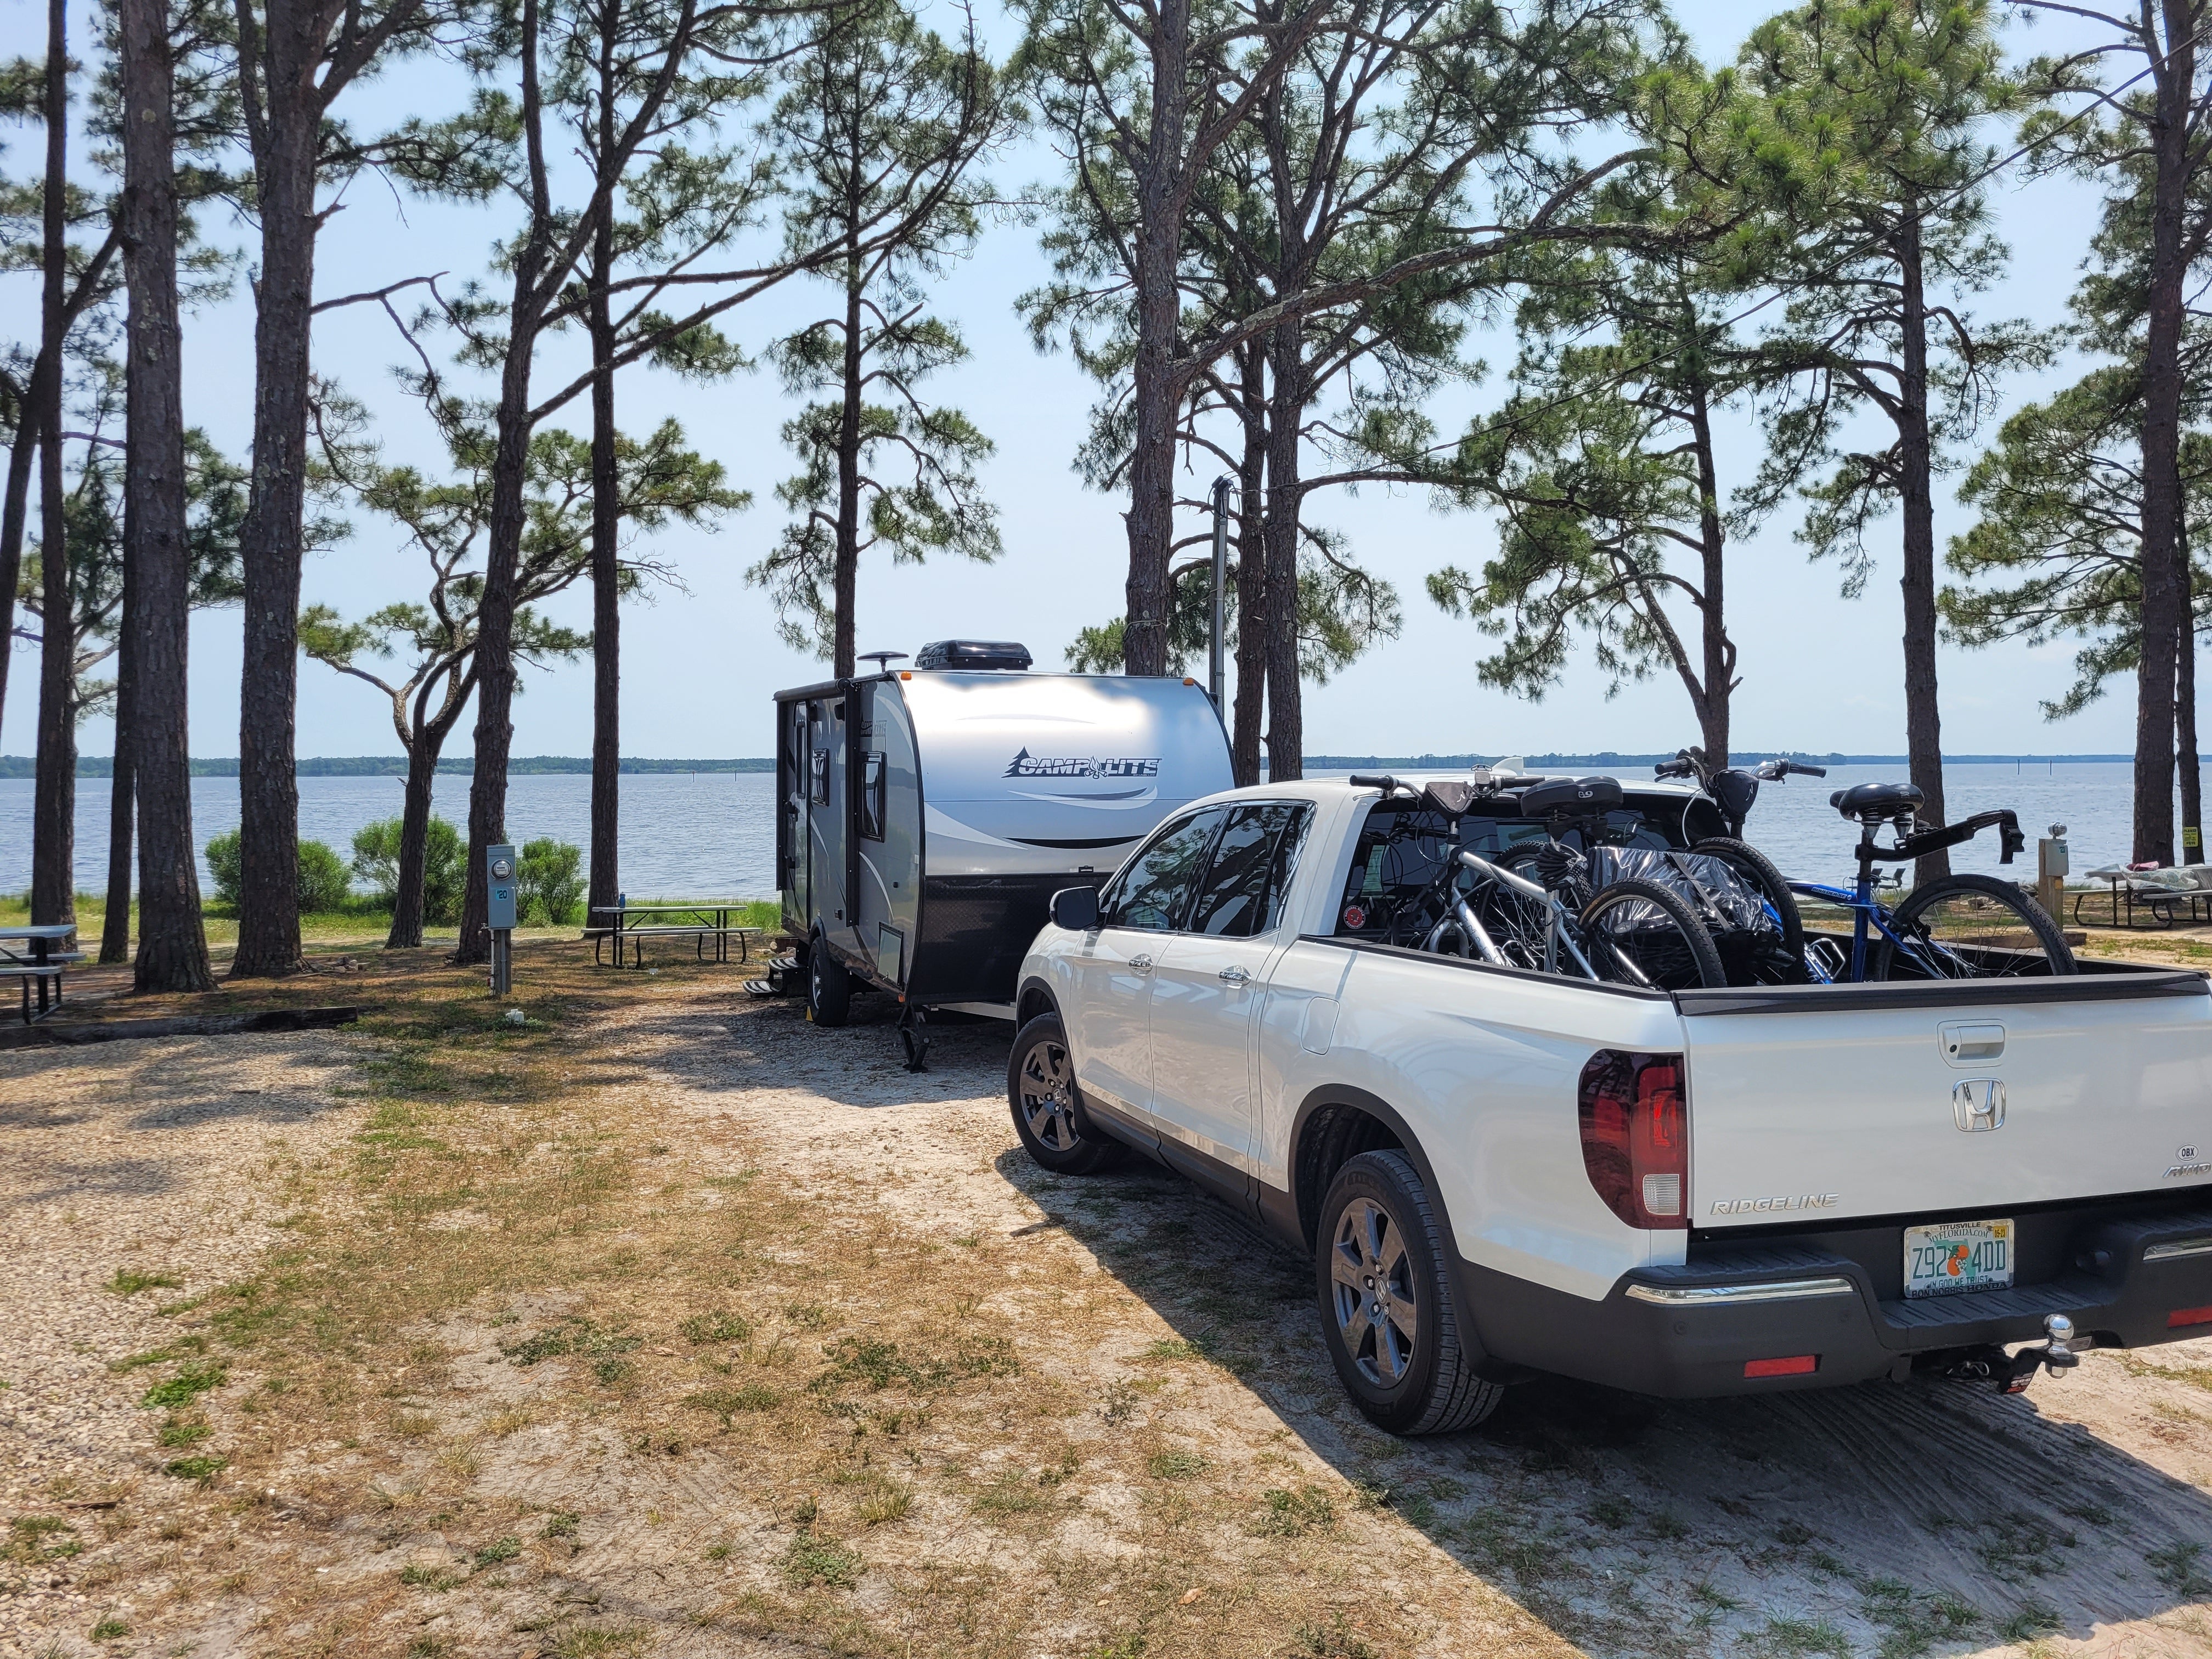 Camper submitted image from Holiday Campground on Ochlockonee Bay - 1